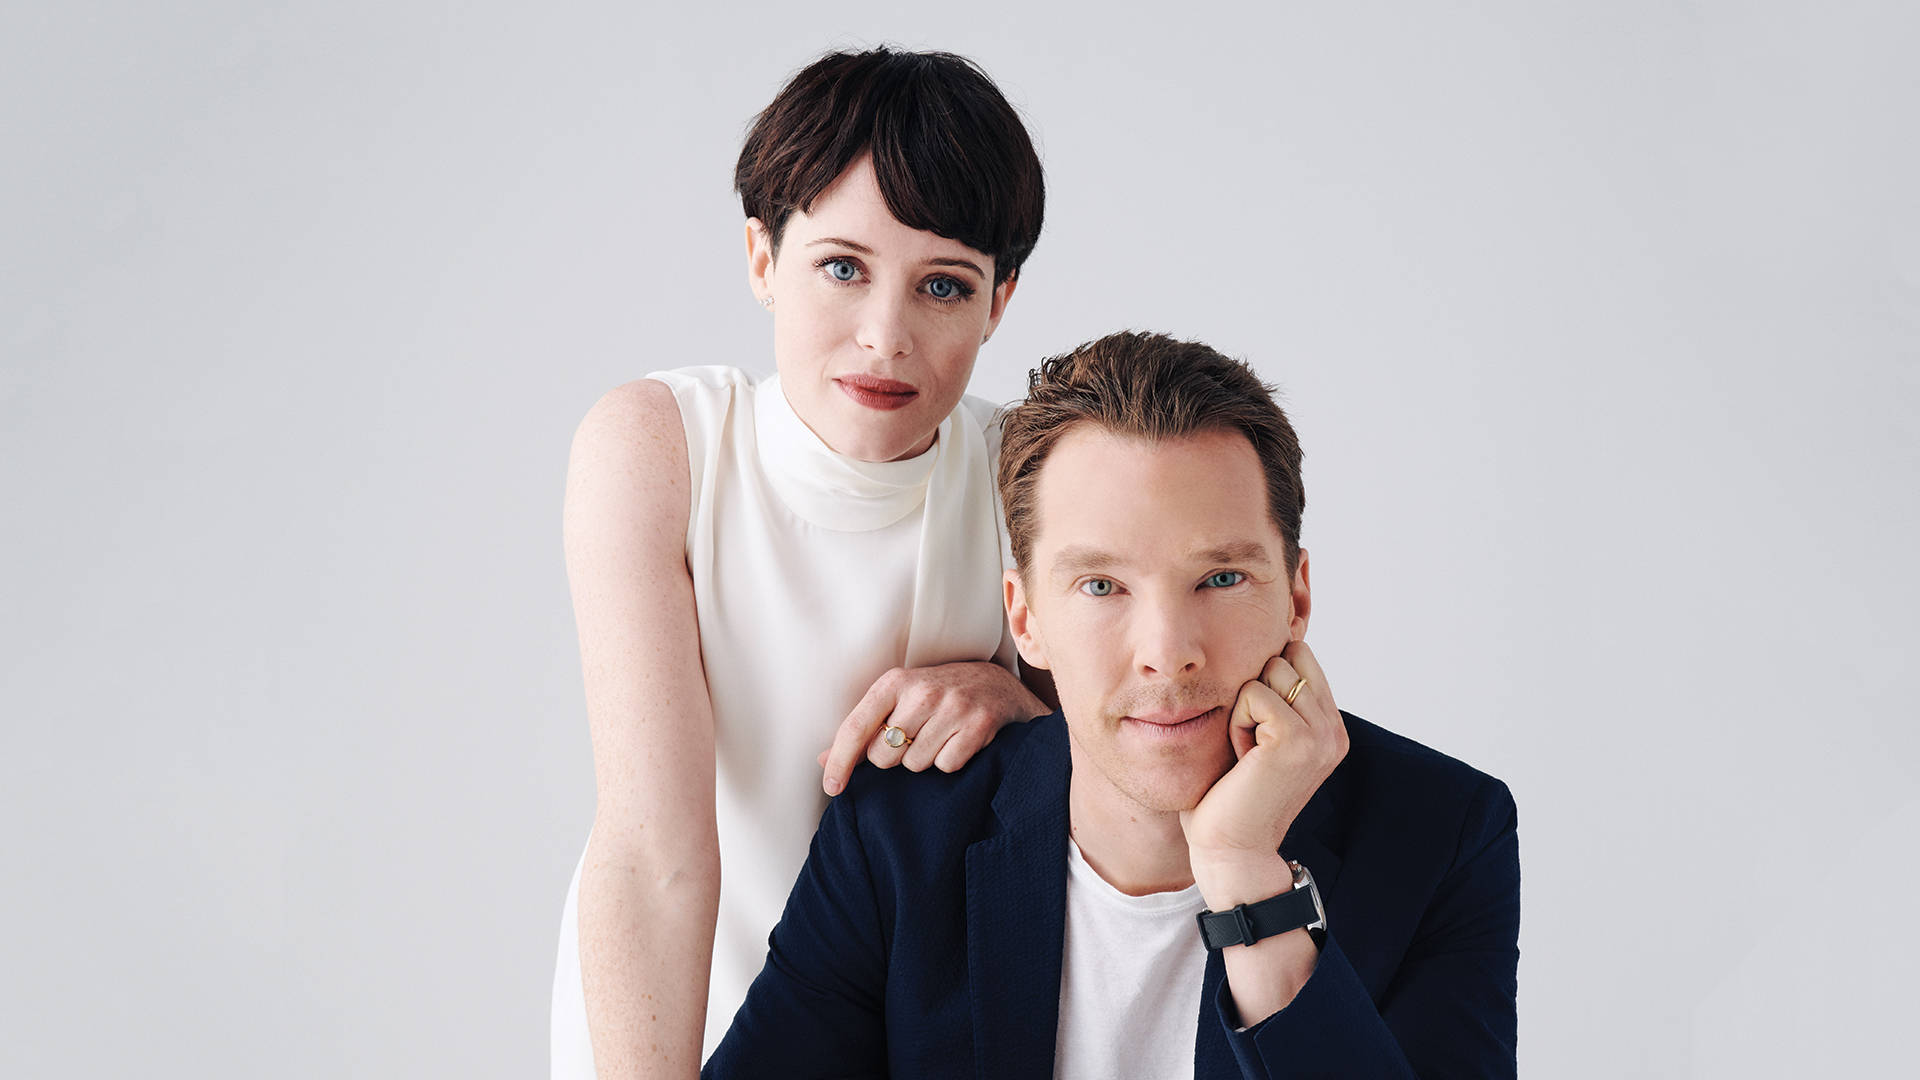 Benedict Cumberbatch With Claire Foy Wallpaper